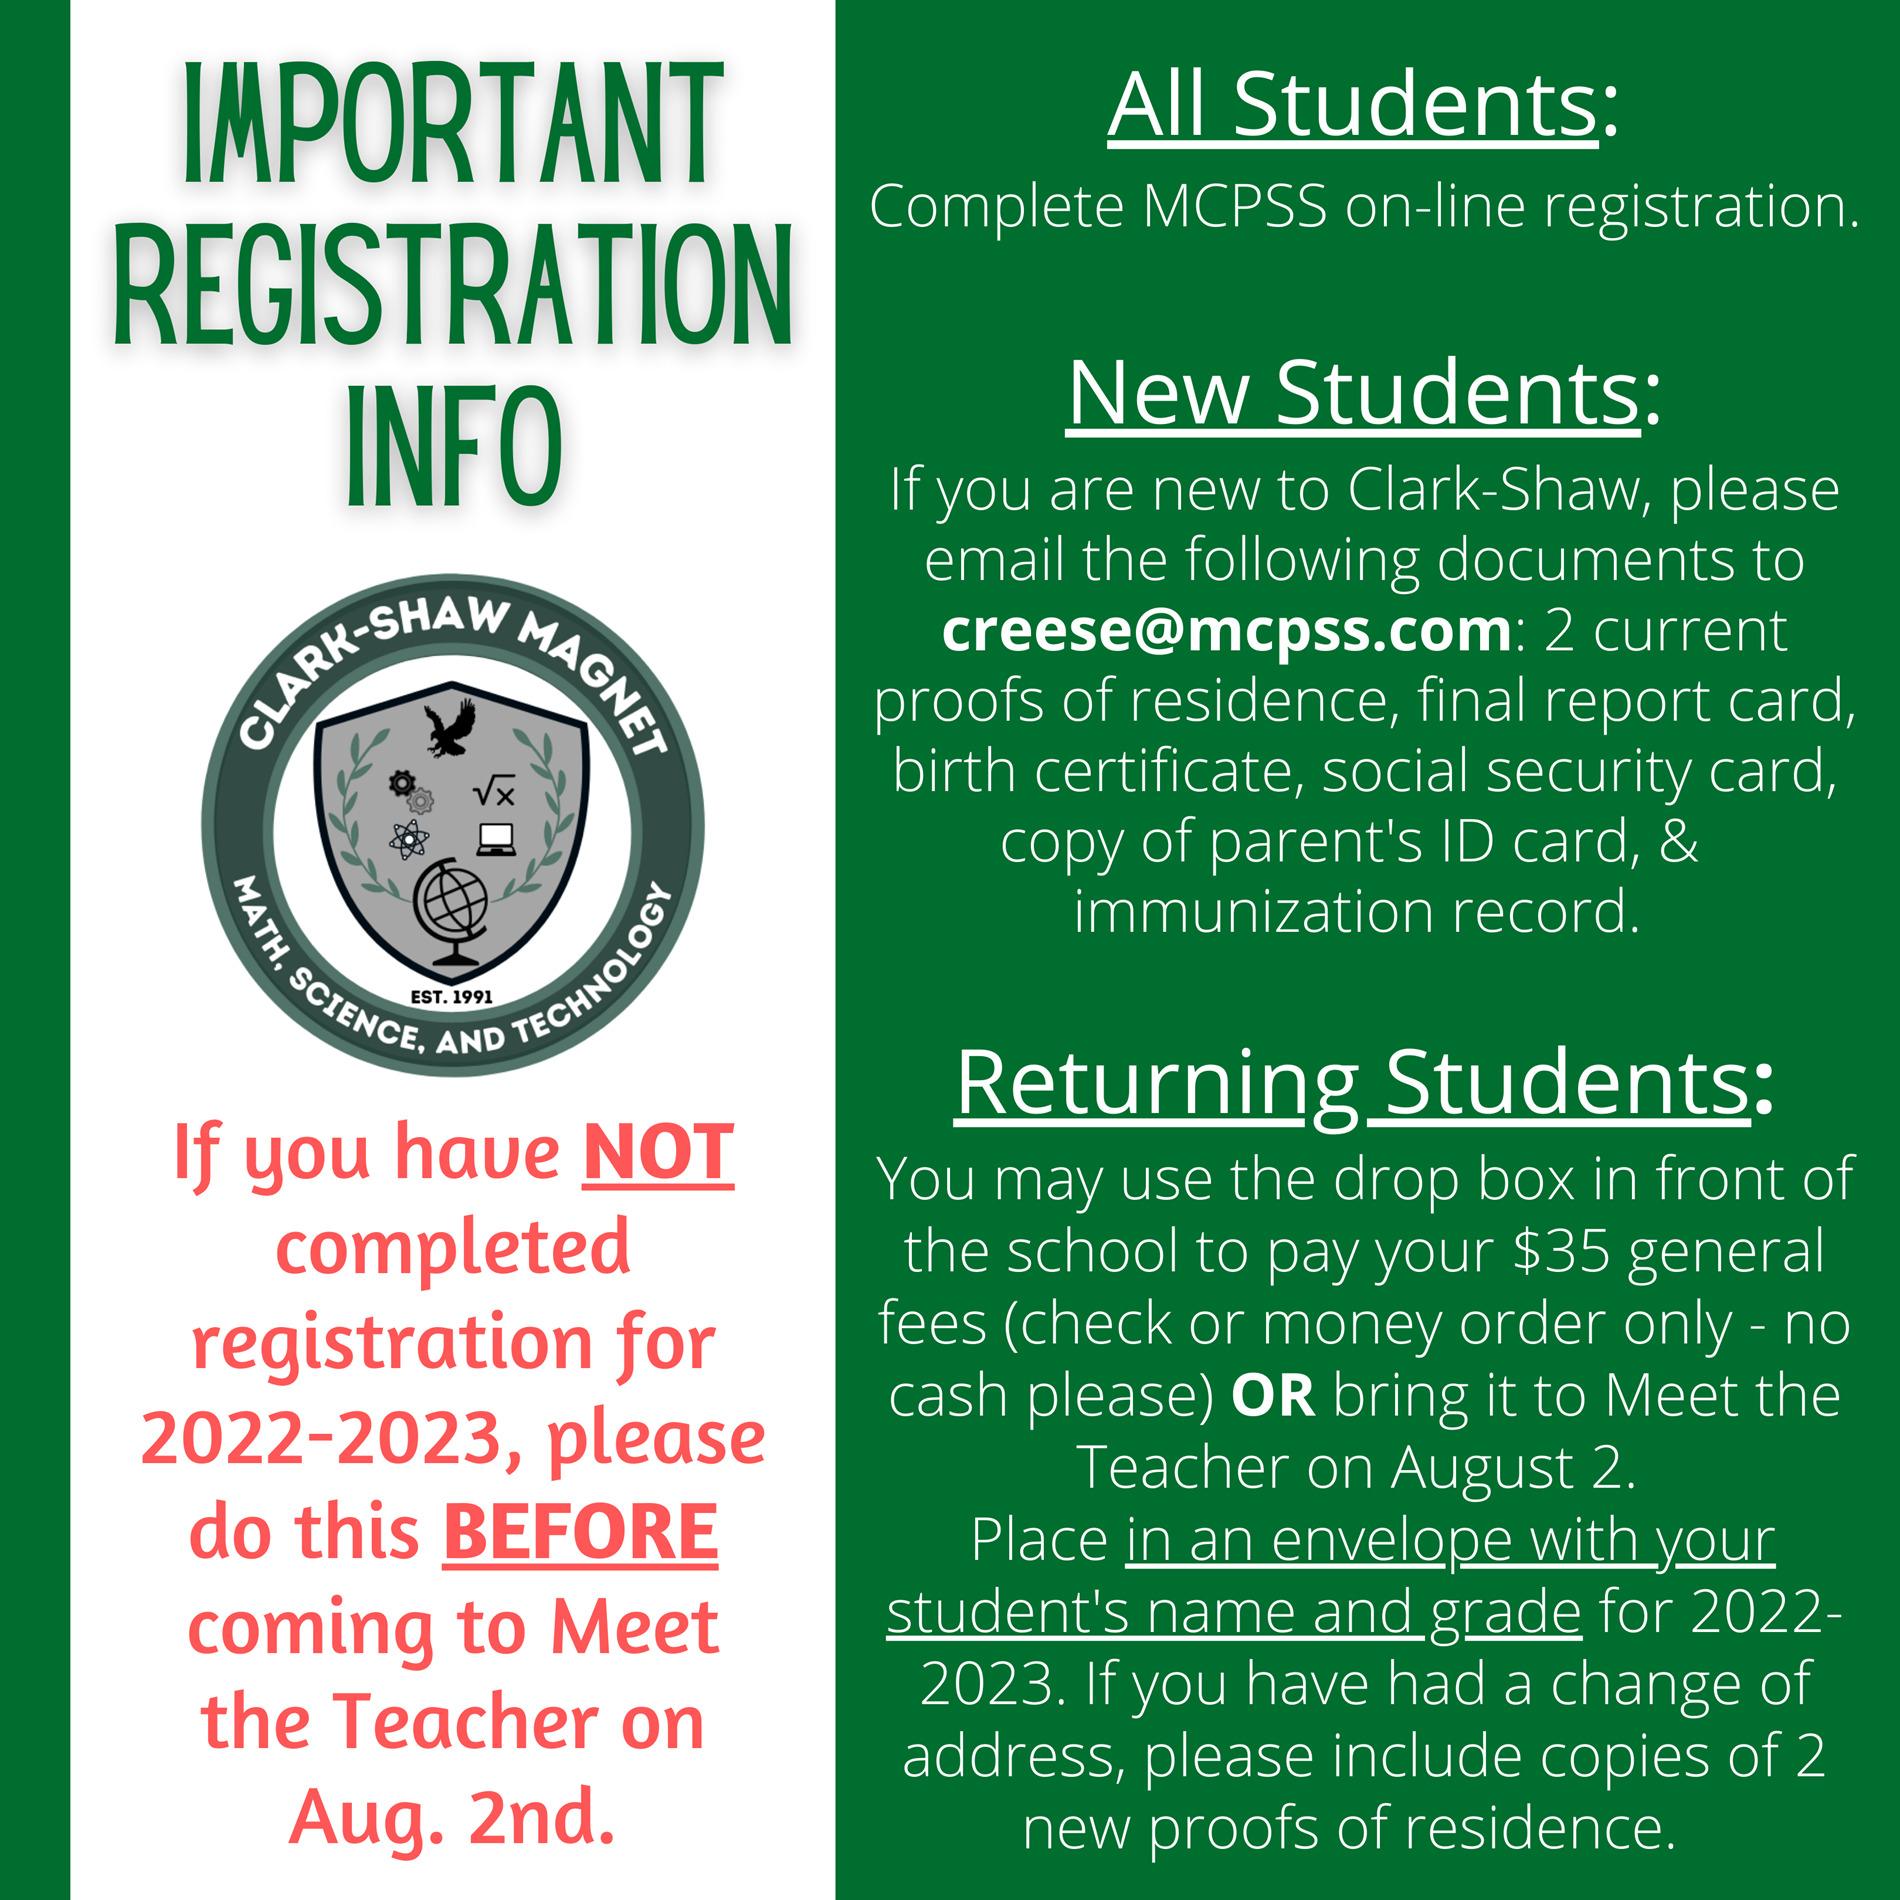 information on registering late